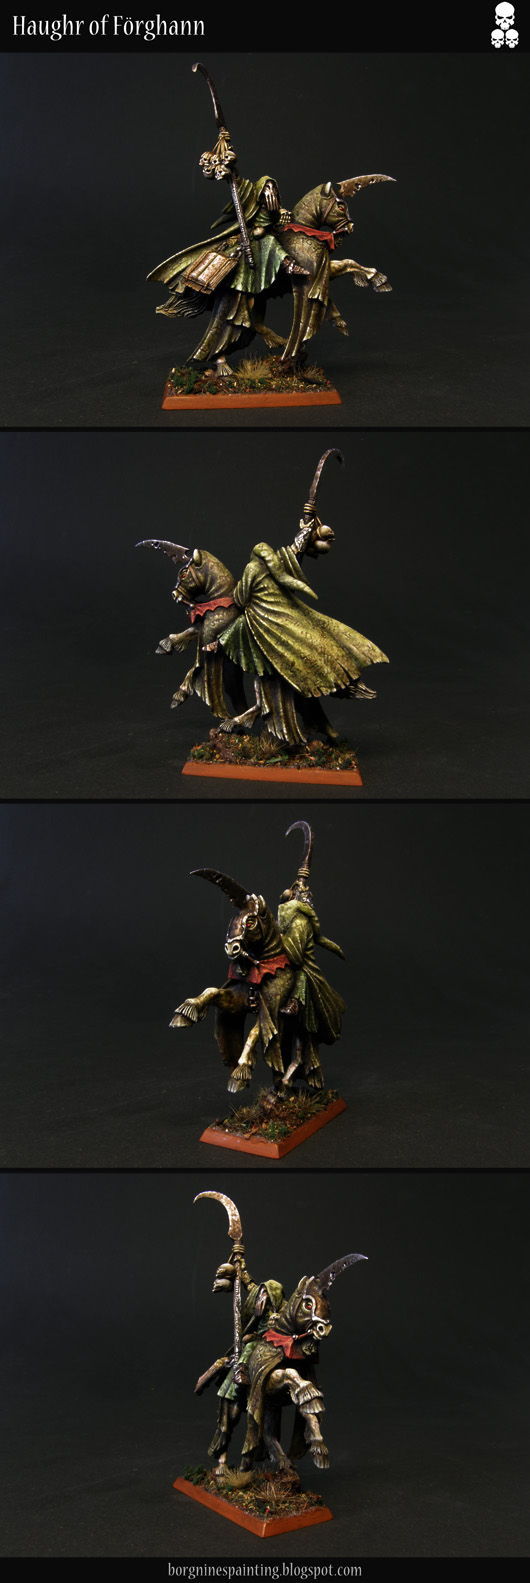 A converted metal Chaos Sorcerer miniature, turned into a mounted Necromancer, visible from different angles. The color scheme is dirty green, he's holding a scythe/staff and has a metal skull-mask on his face.